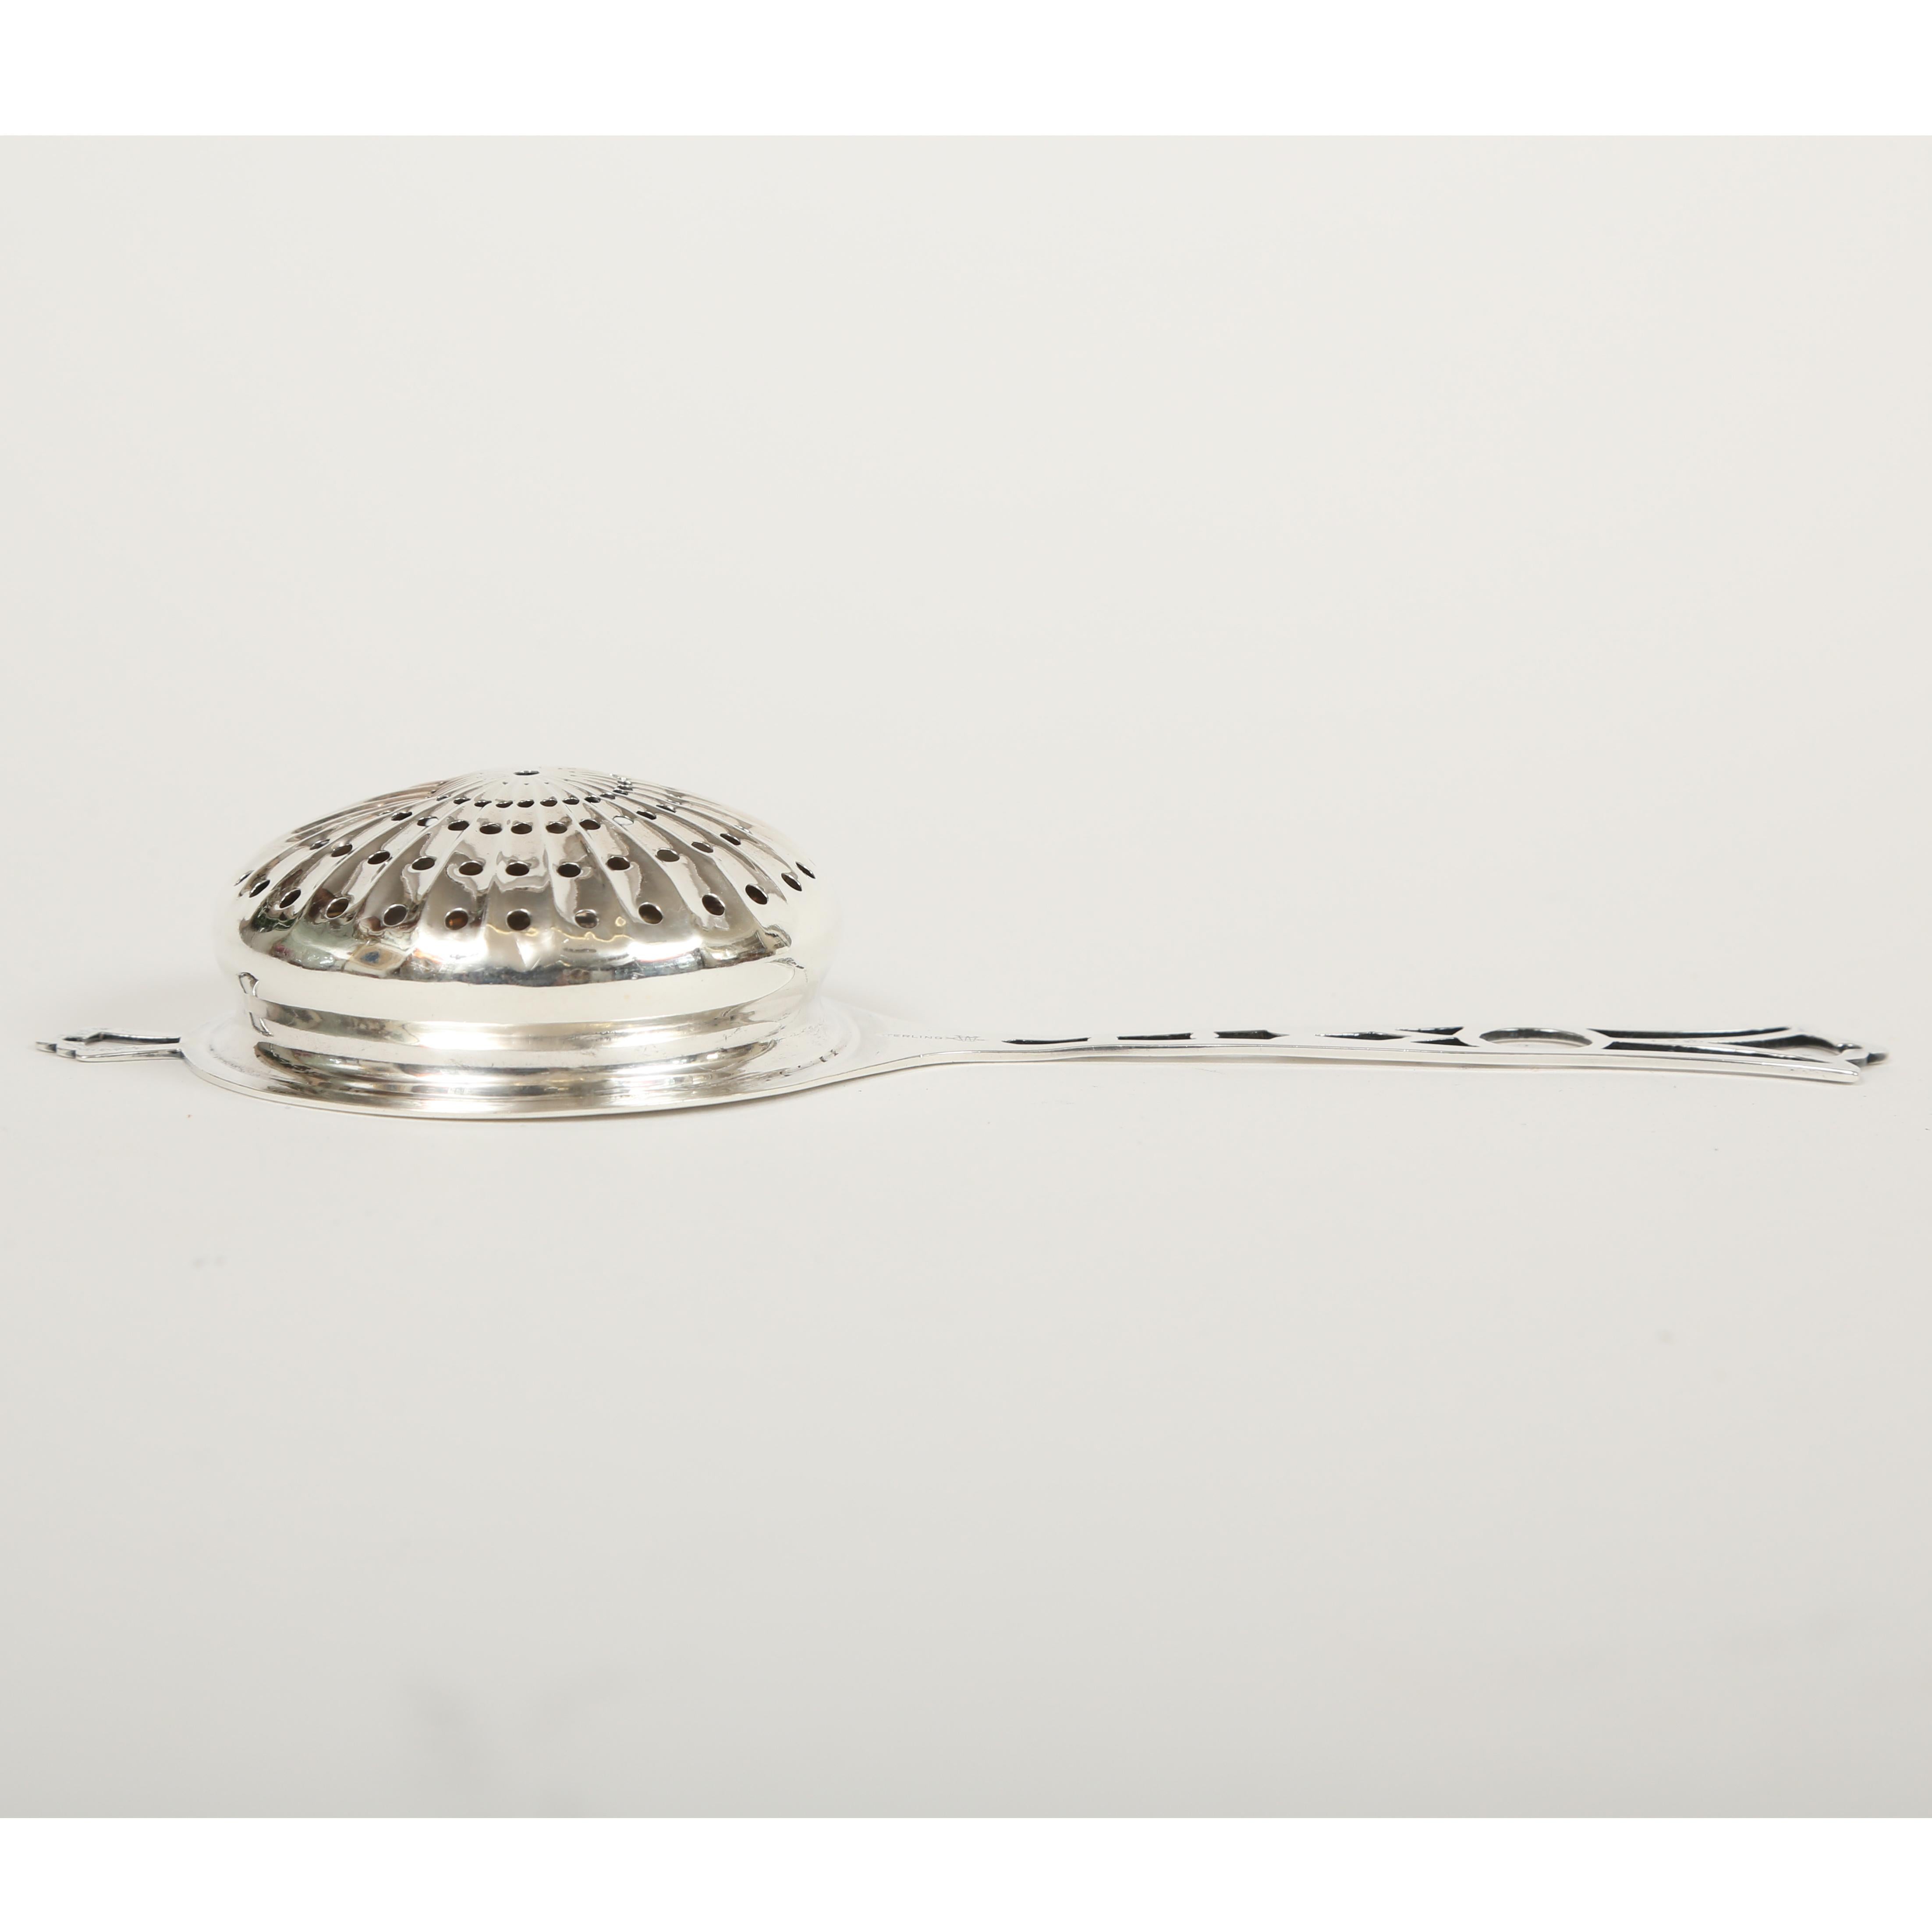 silver tea strainers